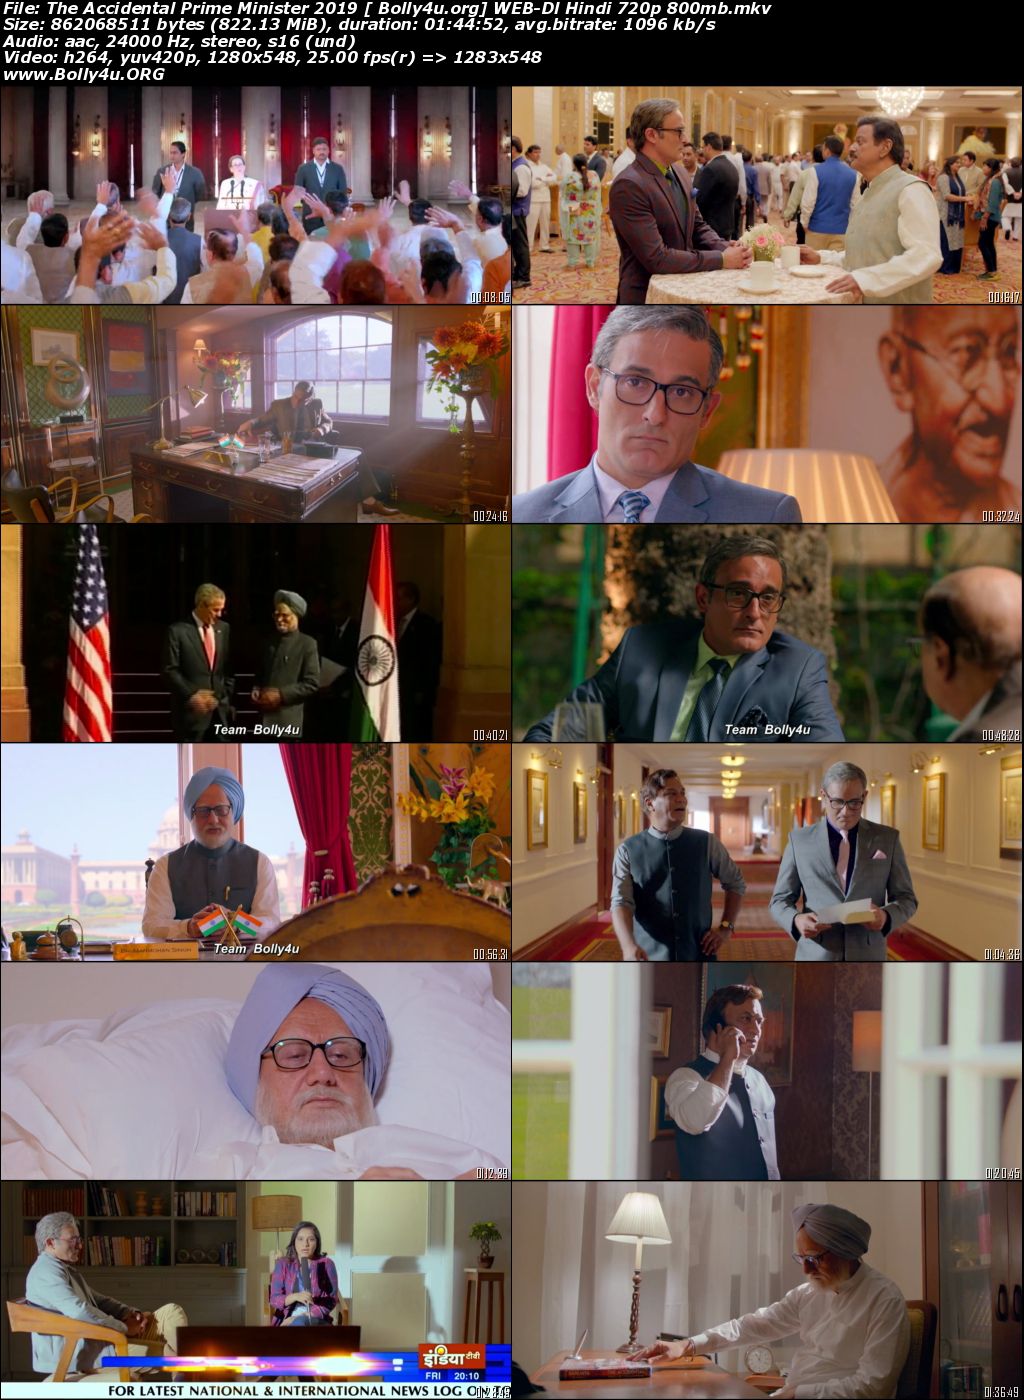 The Accidental Prime Minister 2019 WEB-DL 800Mb Hindi Movie Download 720p